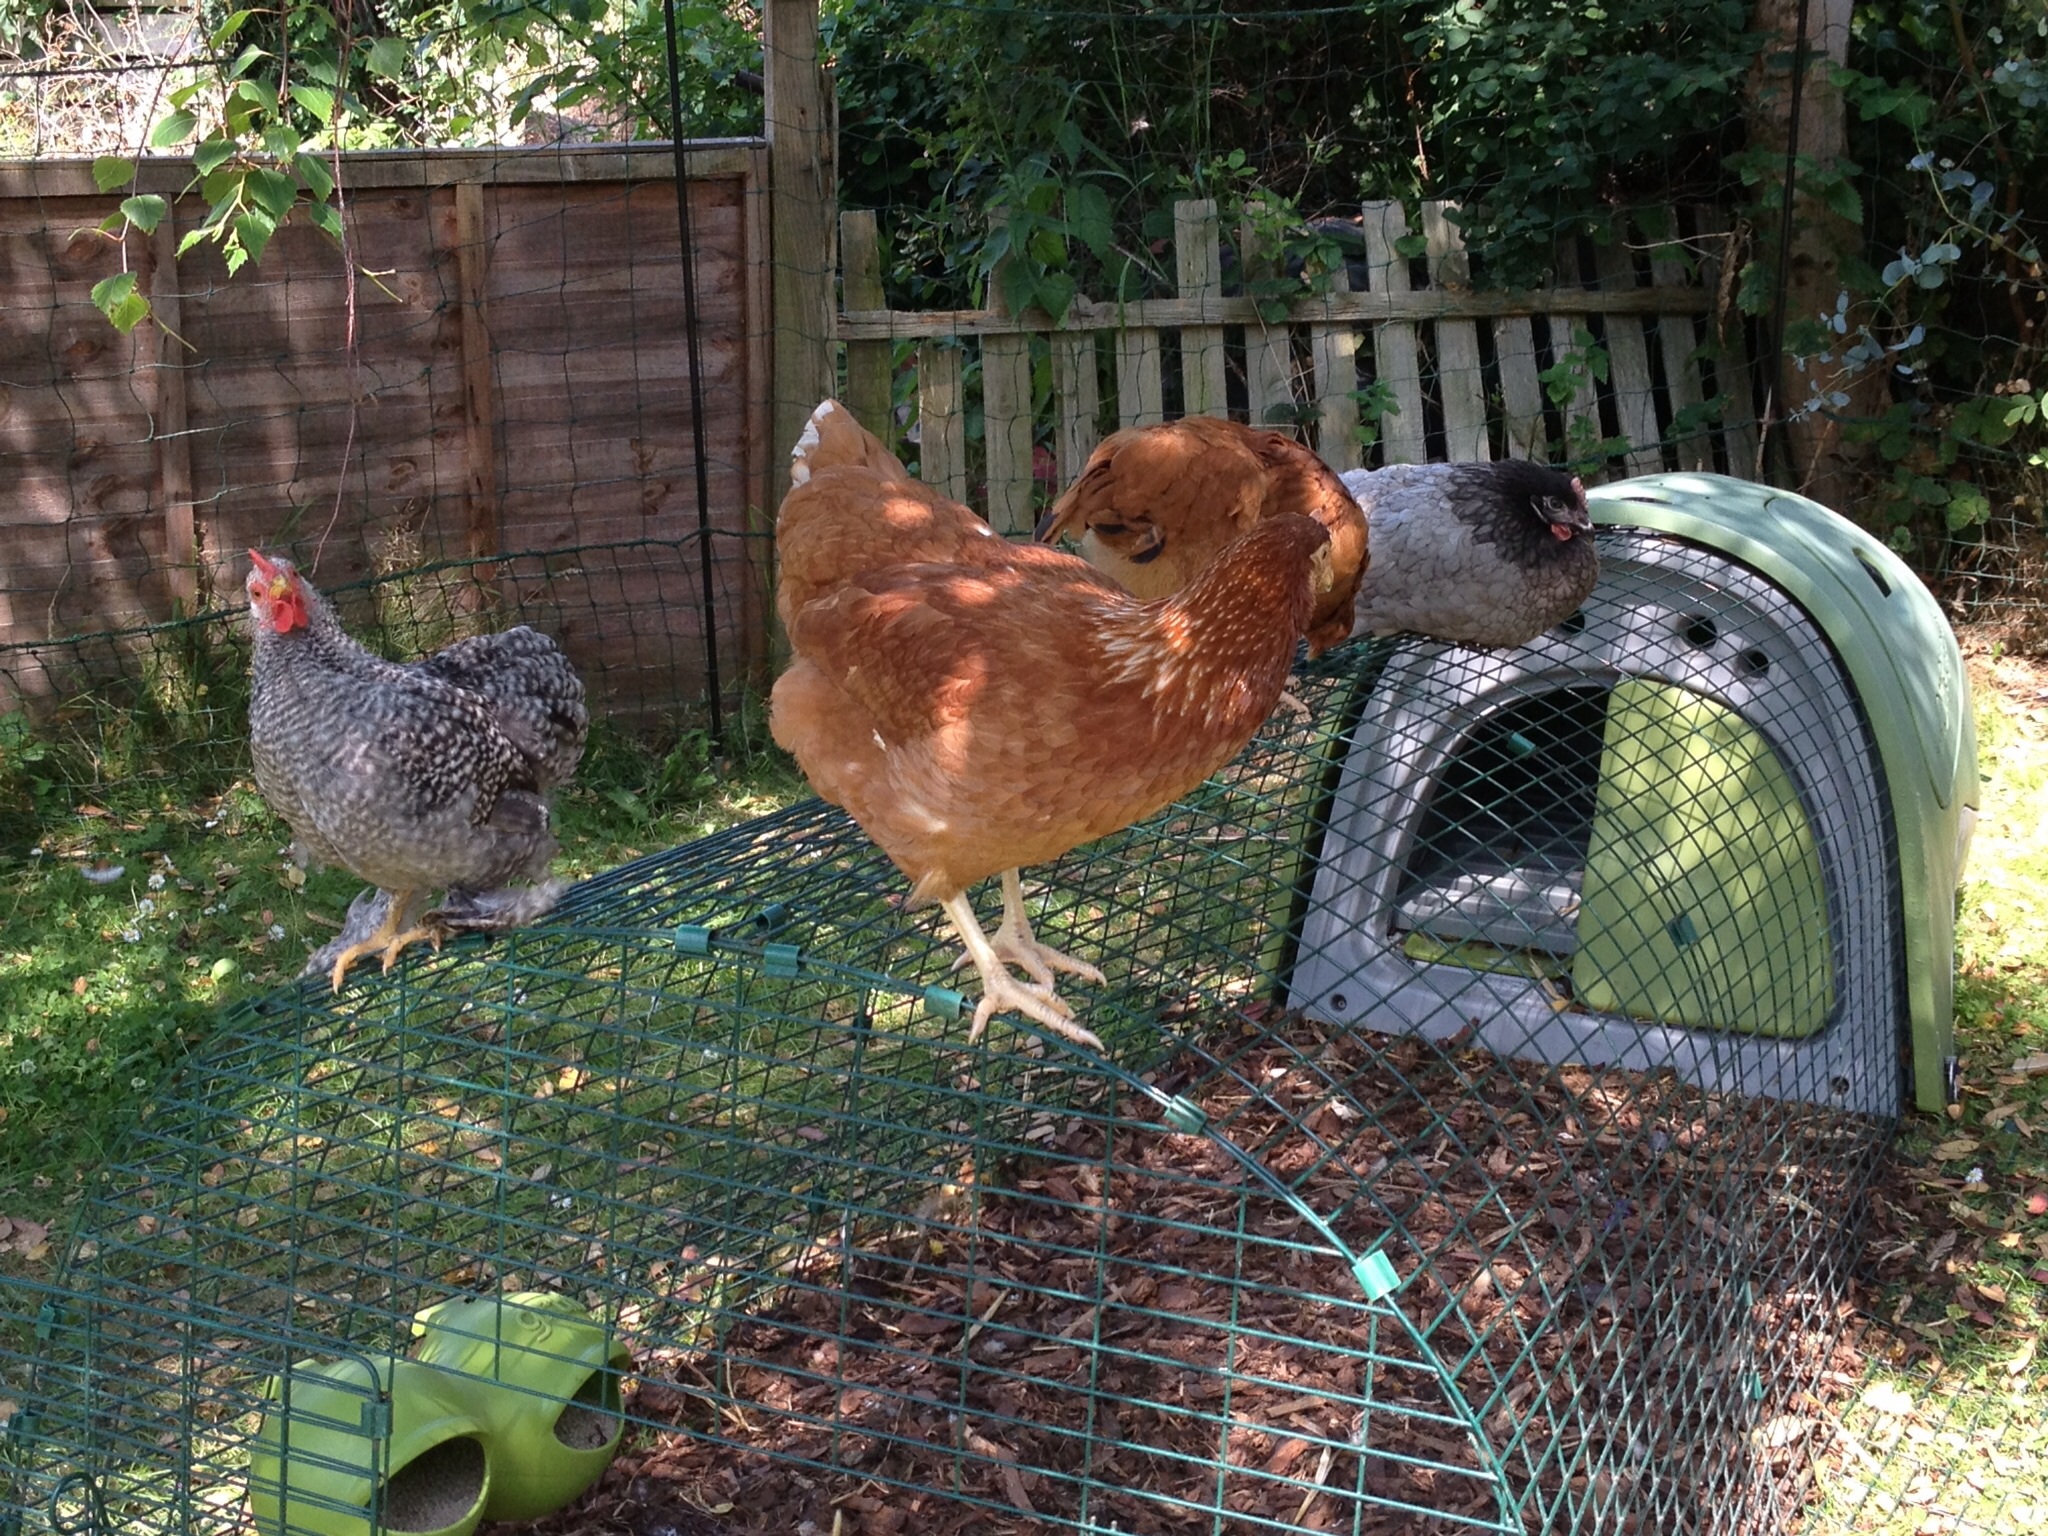 Emilia Taylor's hens enjoying some shade in the back garden